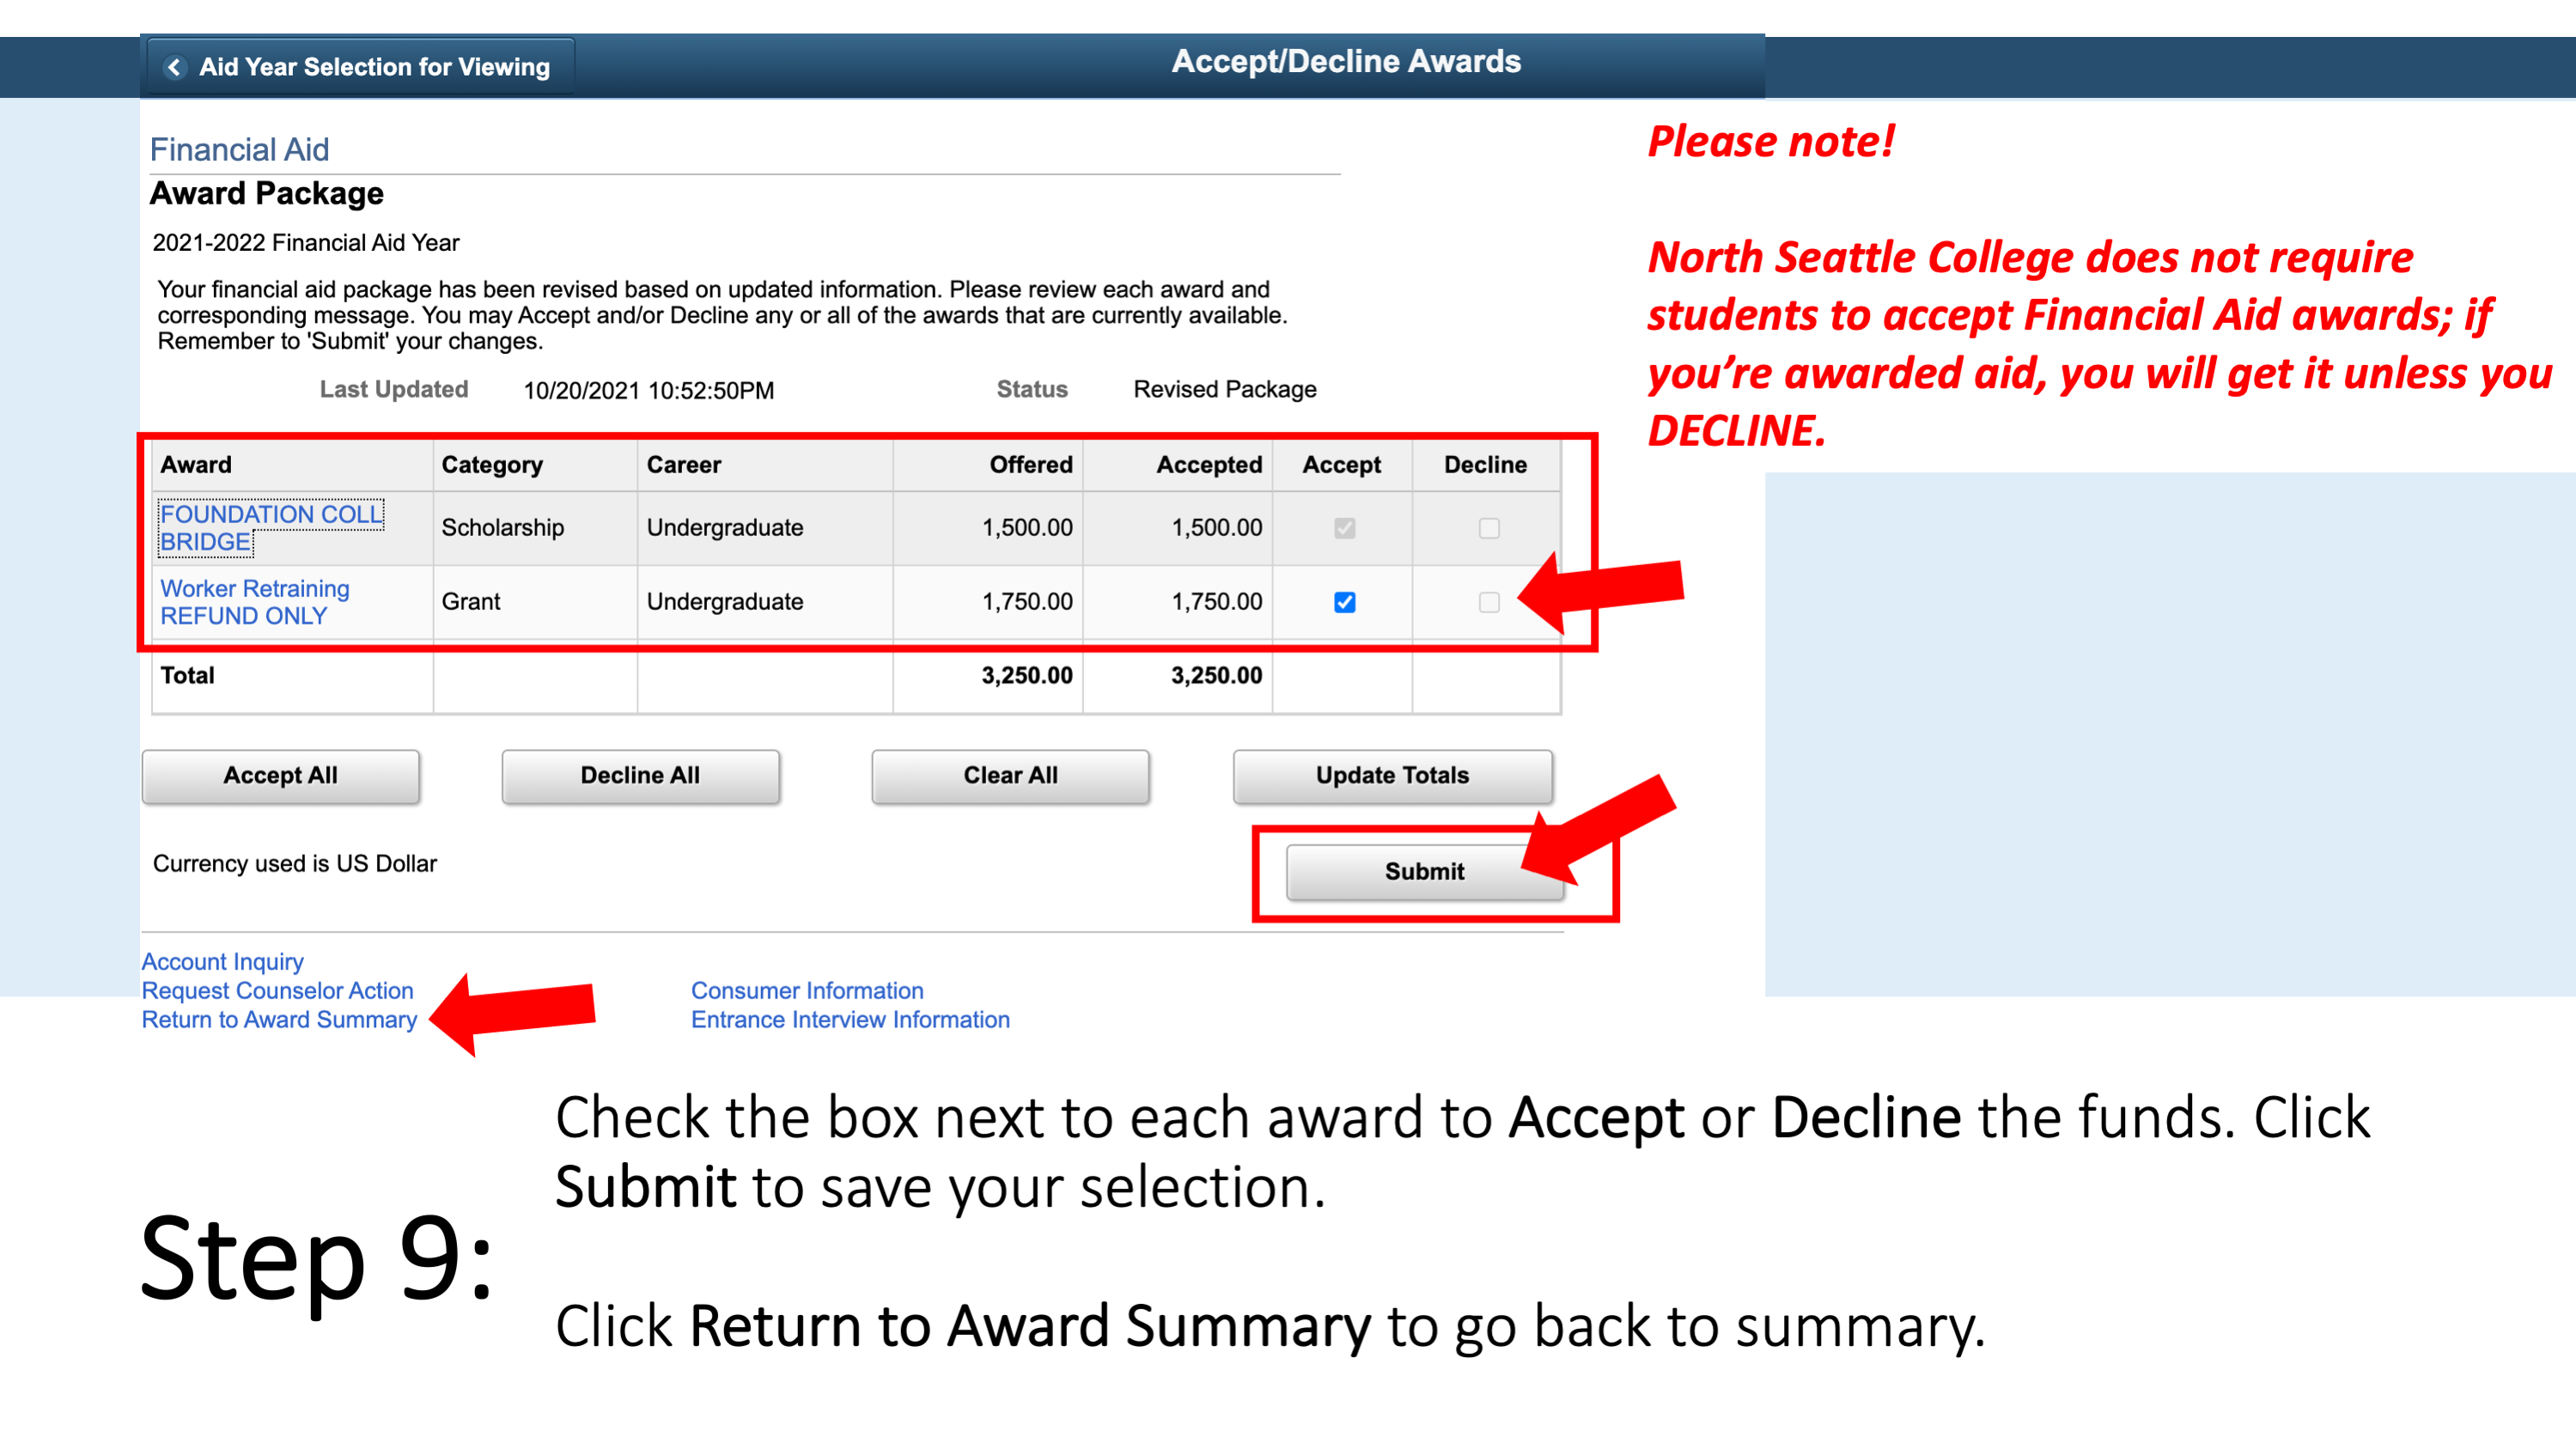 Step 9: Check the box next to each award to Accept or Decline the funds. Click Submit to save your selection. Click Return to Award Summary to go back to summary.